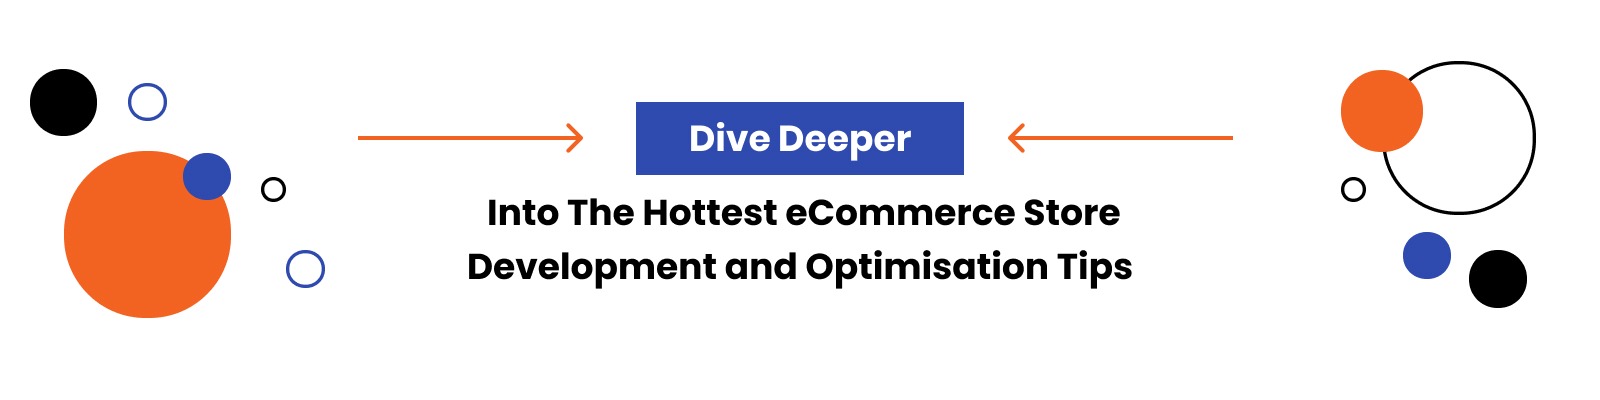 The Hottest eCommerce Store Development and Optimisation Tips